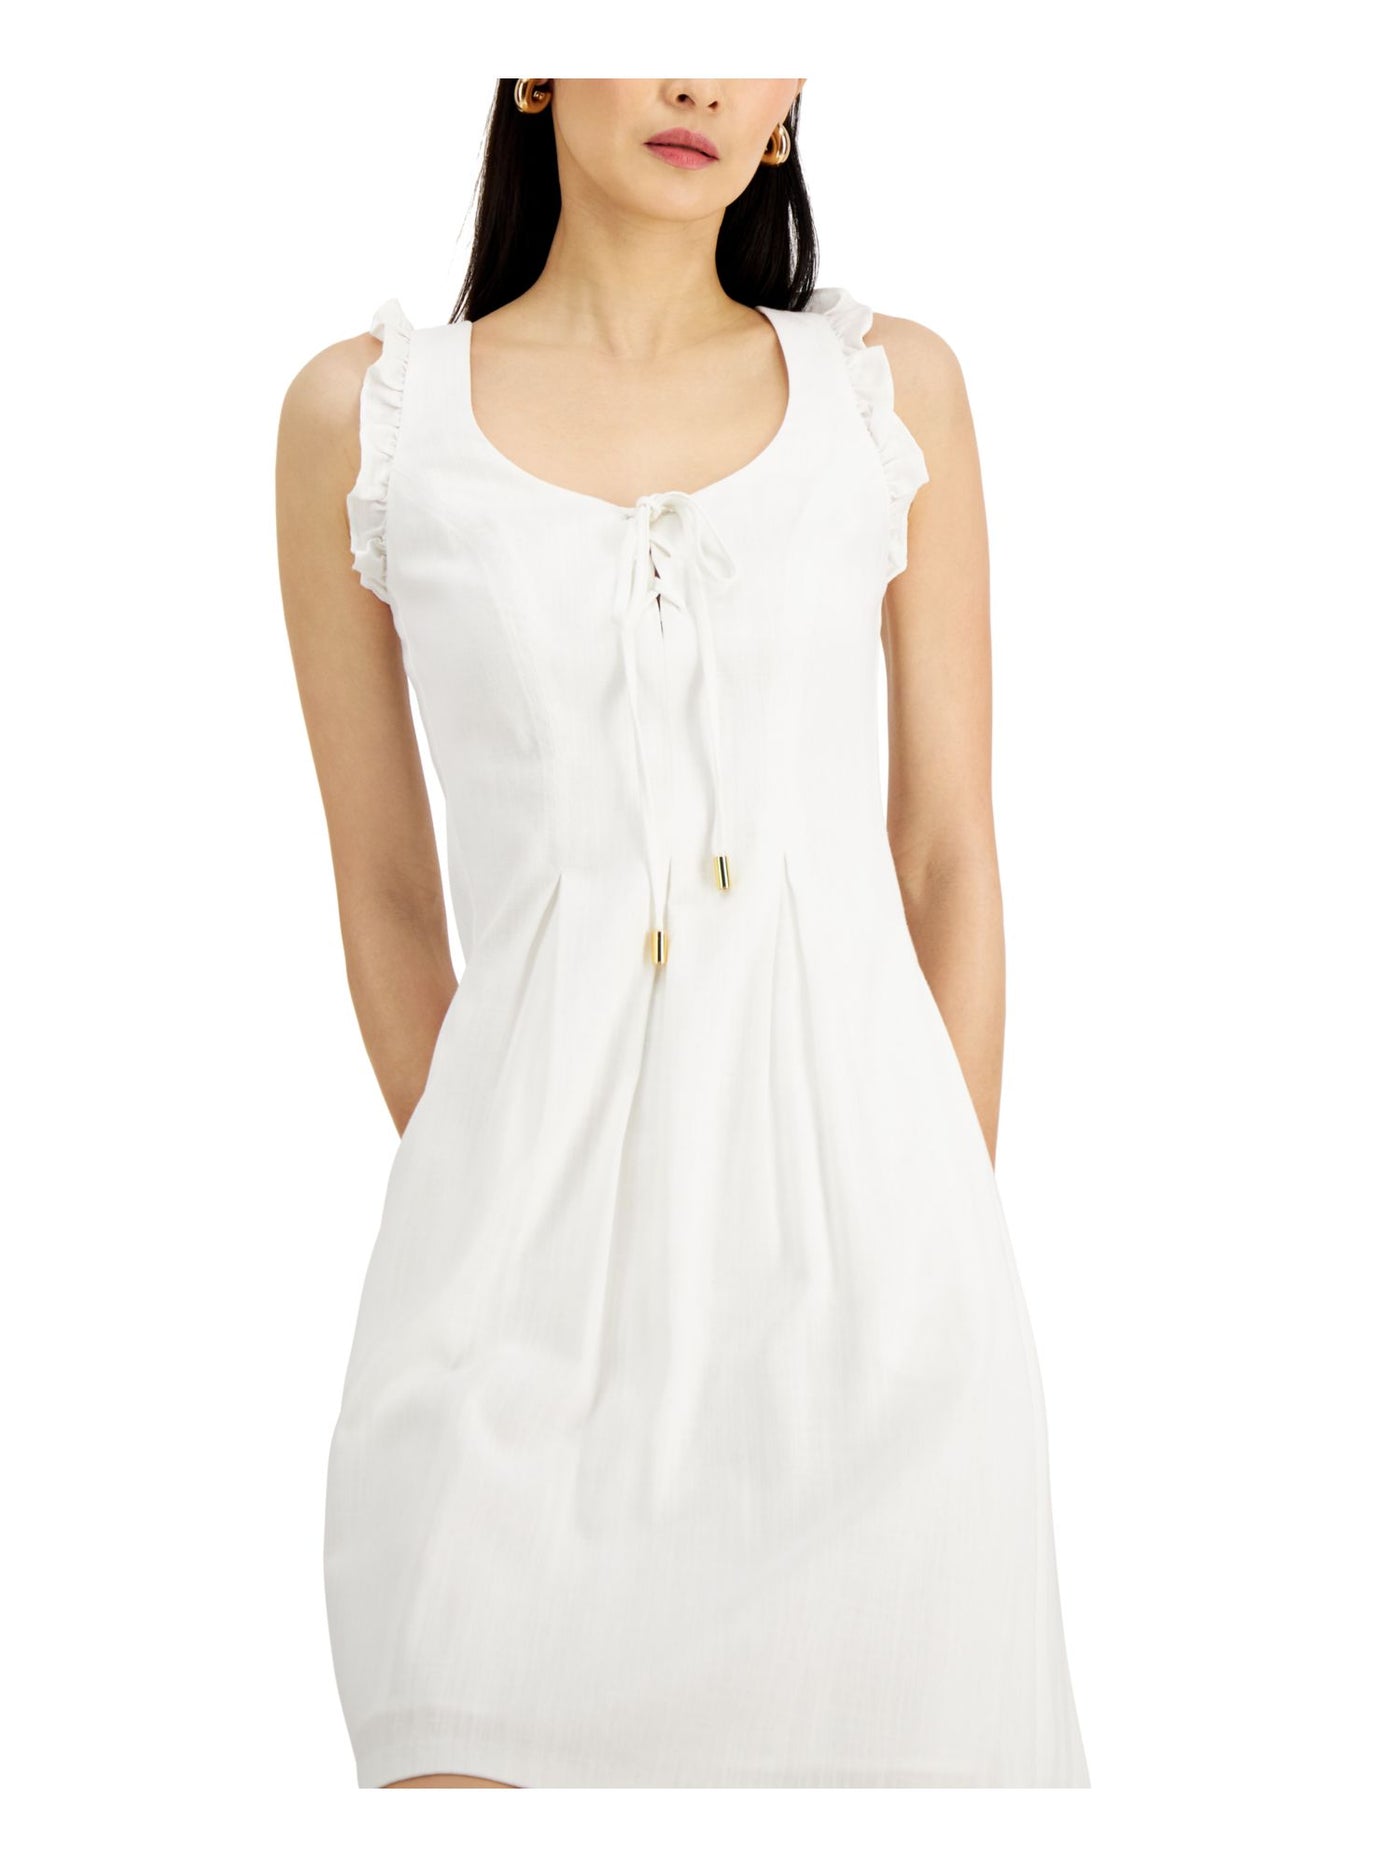 INC DRESS Womens Ivory Pocketed Scoop Neck Above The Knee Party Fit + Flare Dress 14